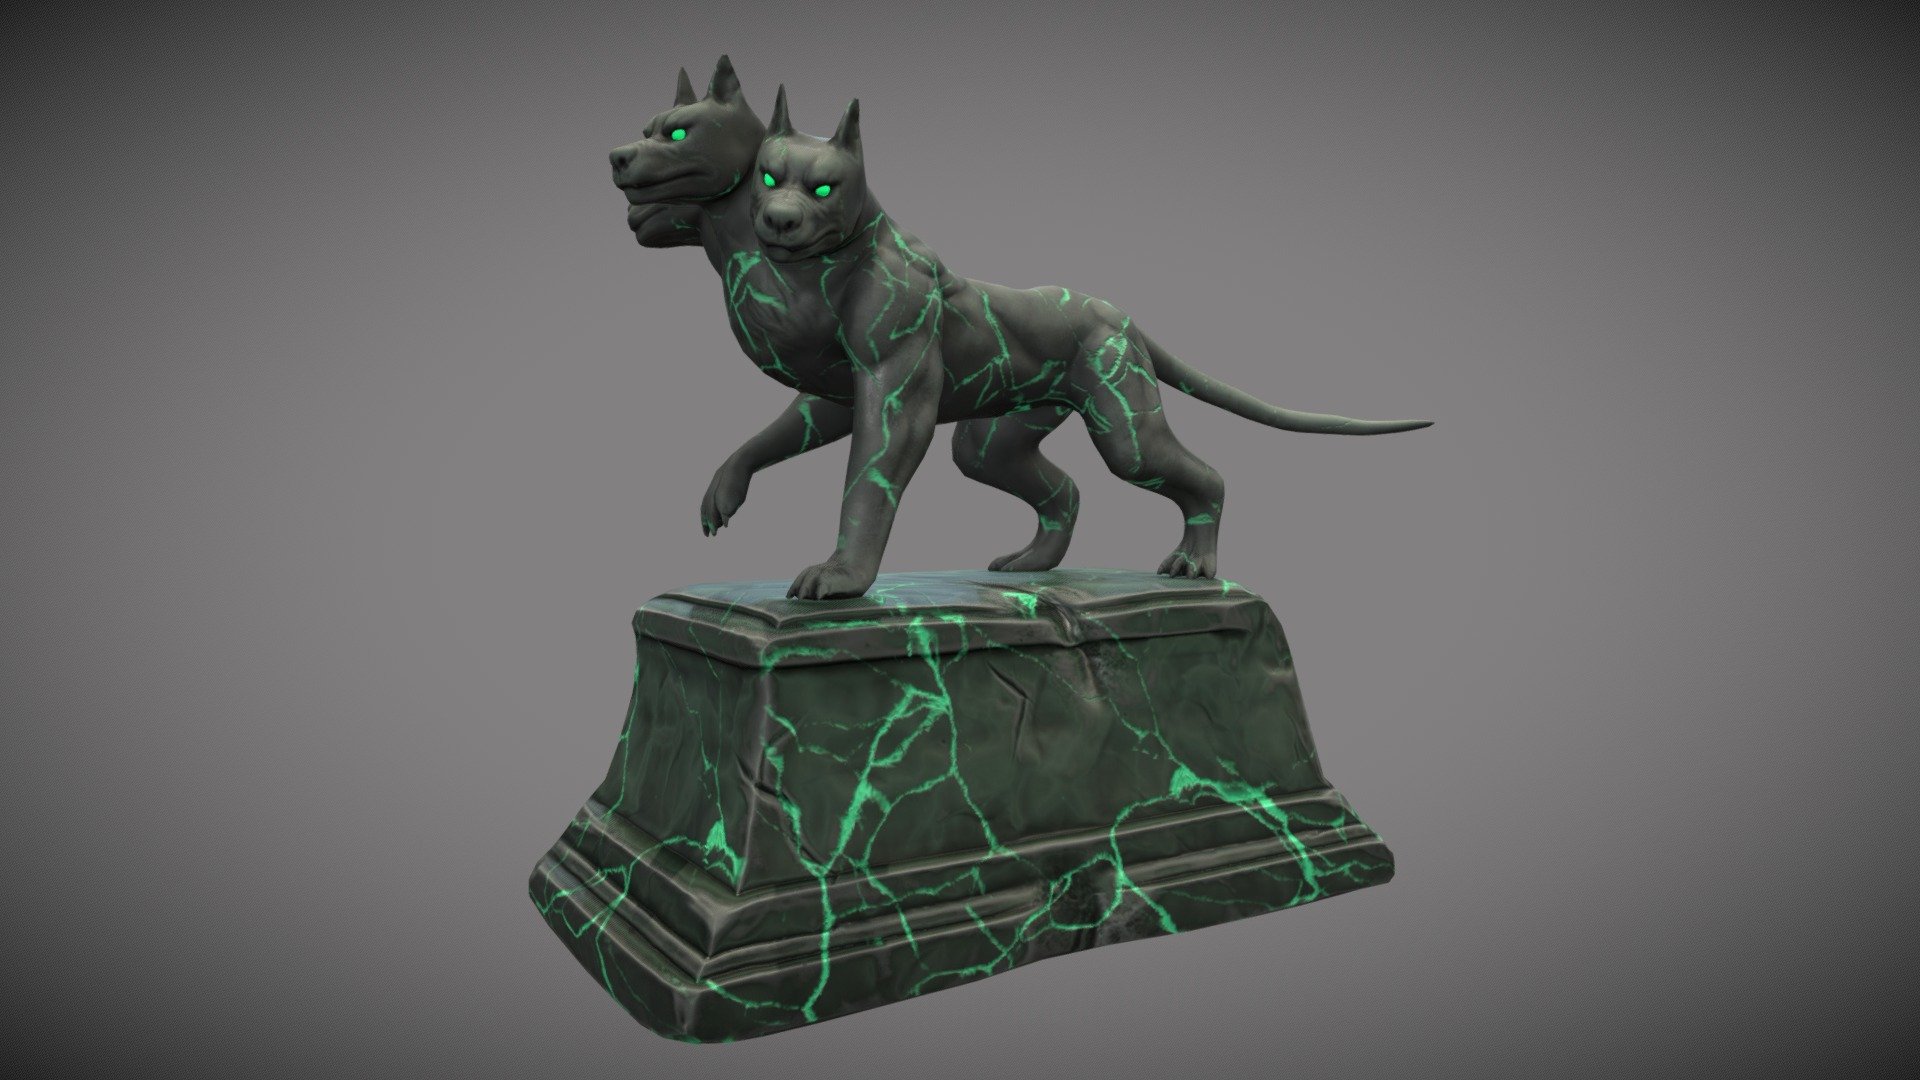 Statue of Cerberus, the three-headed dog from Greek mythology. Made as an asset for an upcoming game that me and my team are working on.

Blocked out in Maya, sculpted in ZBrush, and textured in Substance Painter 3d model